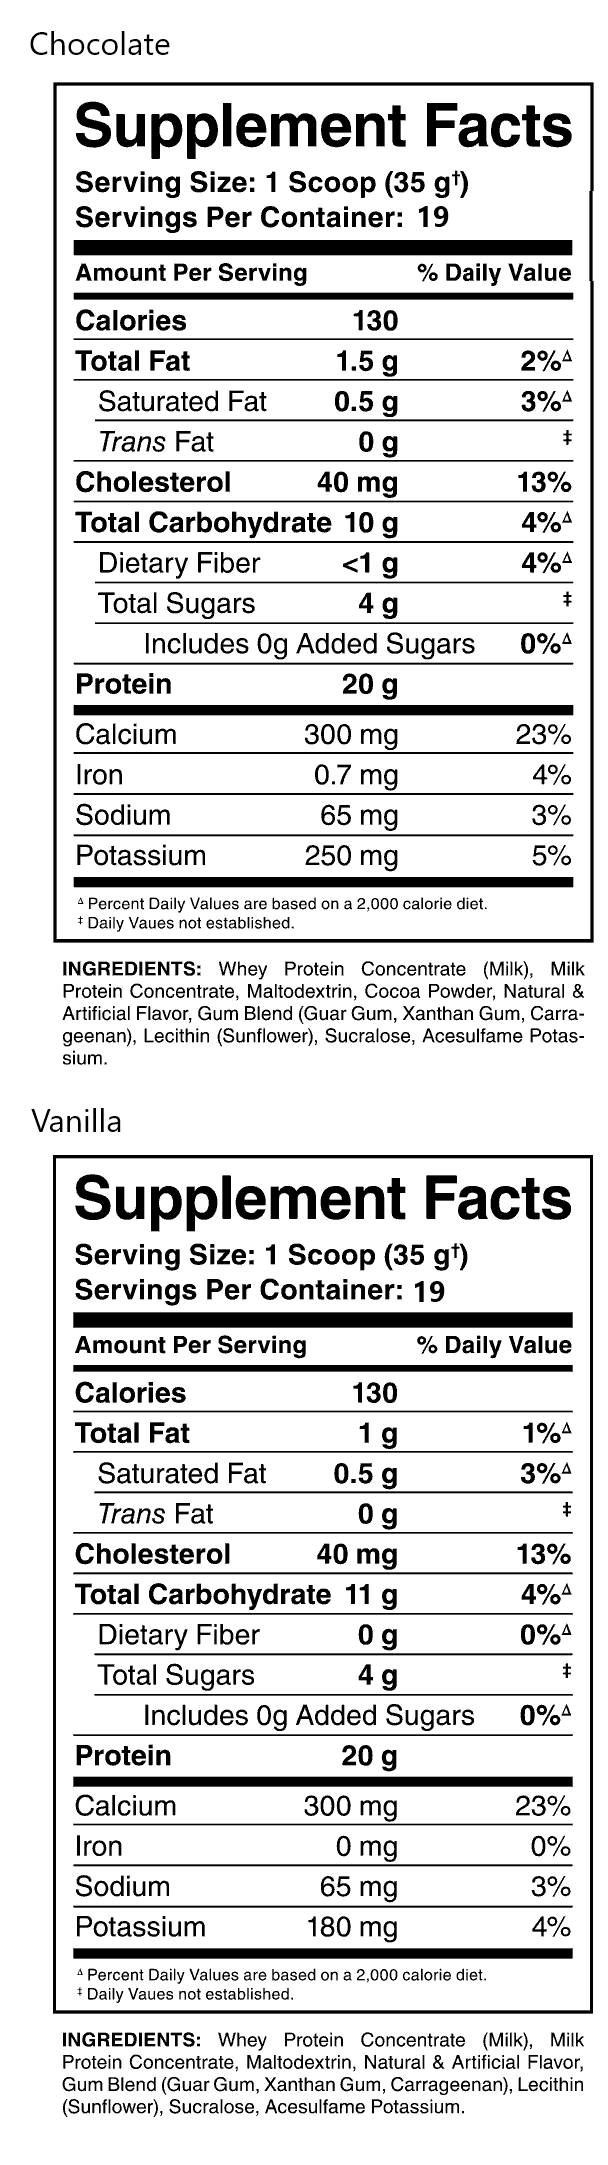 Supplement facts for chocolate and vanilla flavoured nutrition shakes, showing their serving sizes, nutritional value, ingredients, and percent daily values.